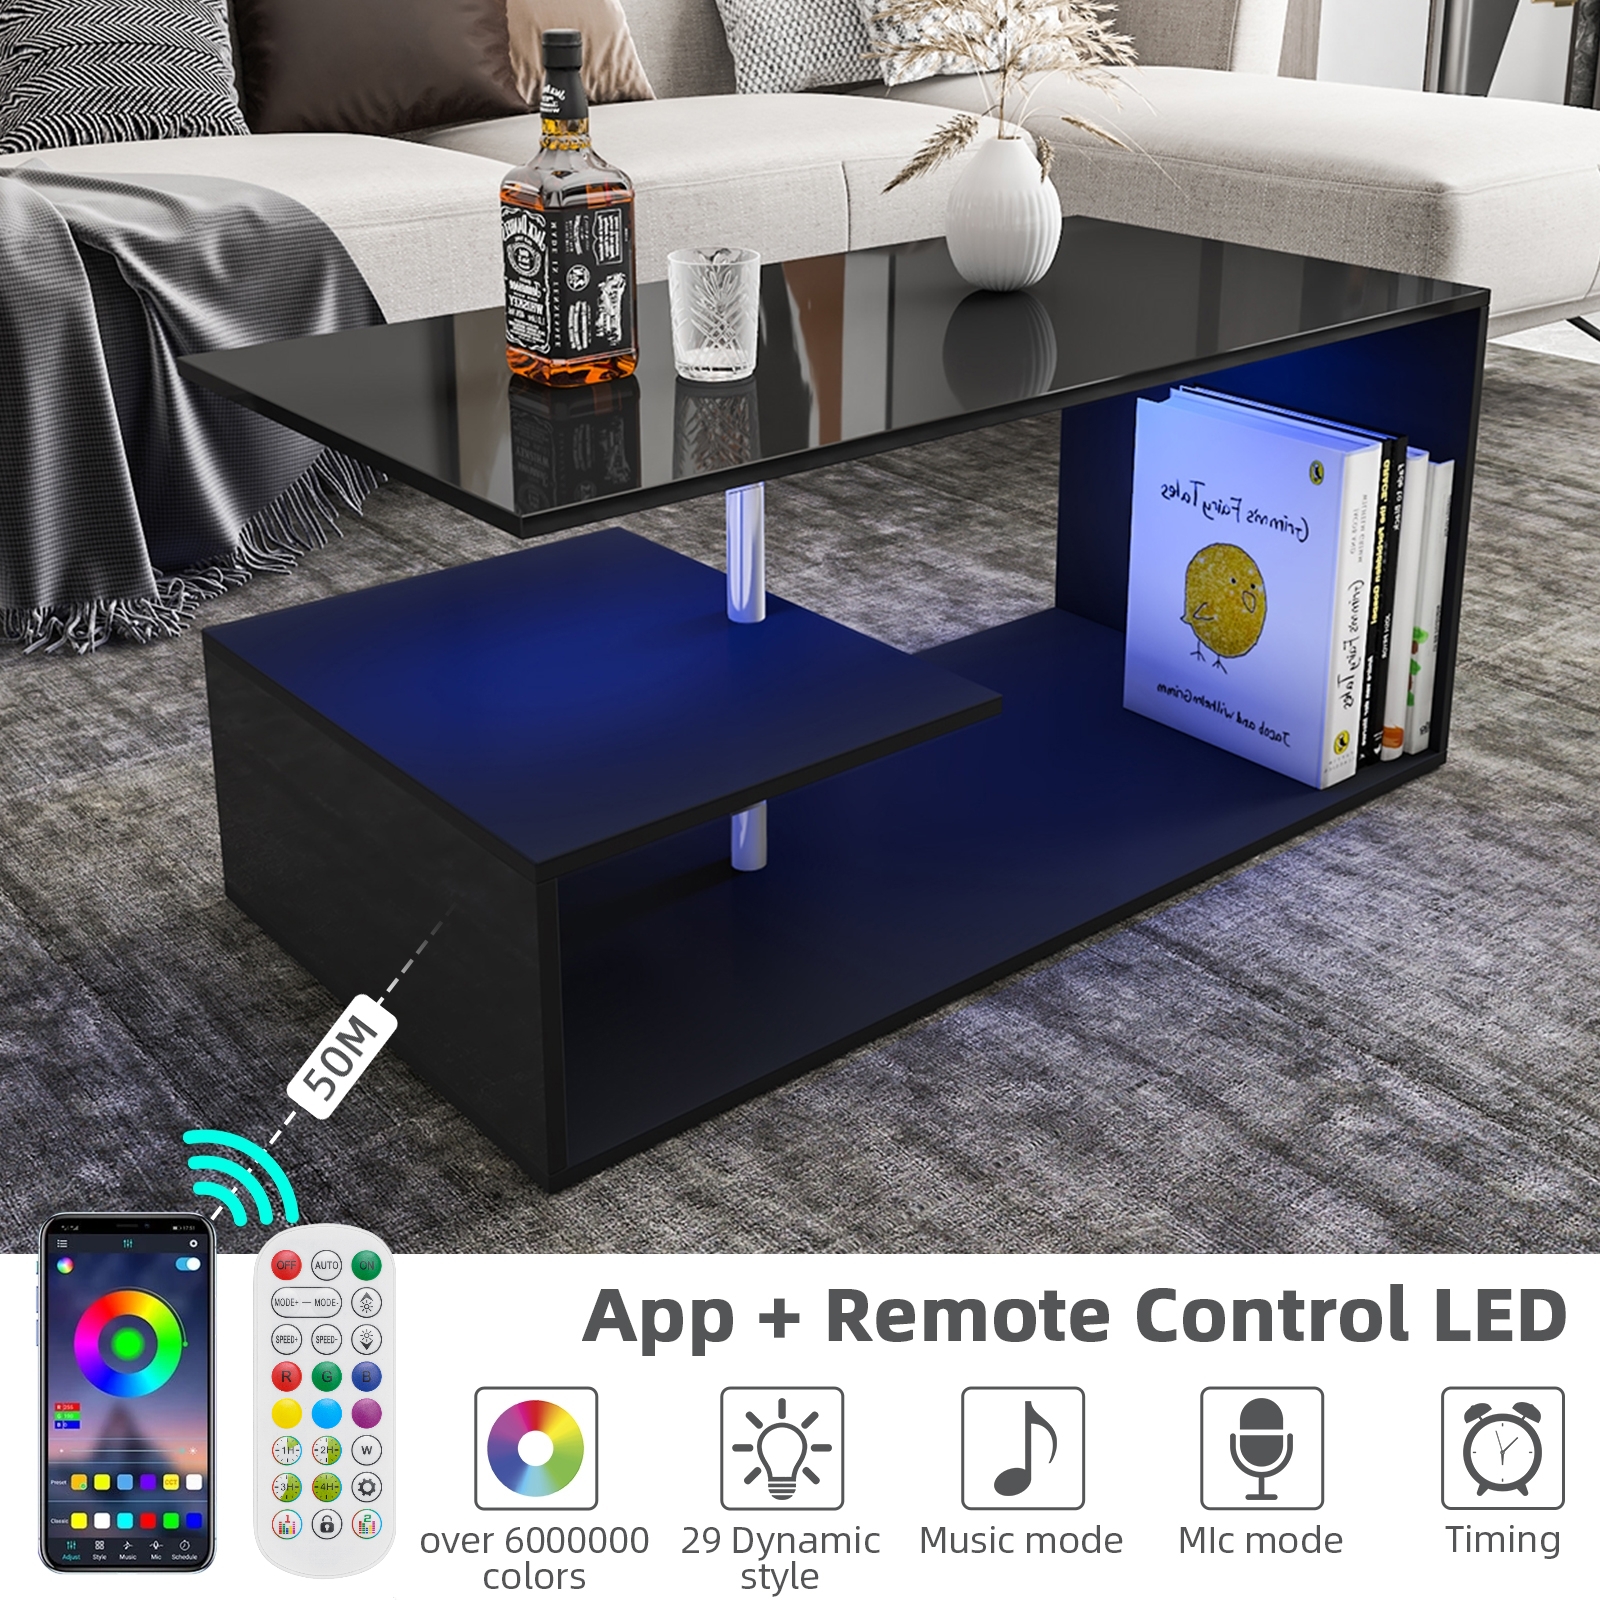 Hommpa High Gloss Coffee Table with Open Shelf LED Lights Smart APP Control Black Center Sofa End Table S Shaped Modern Cocktail Tables with for Living Room - image 5 of 12